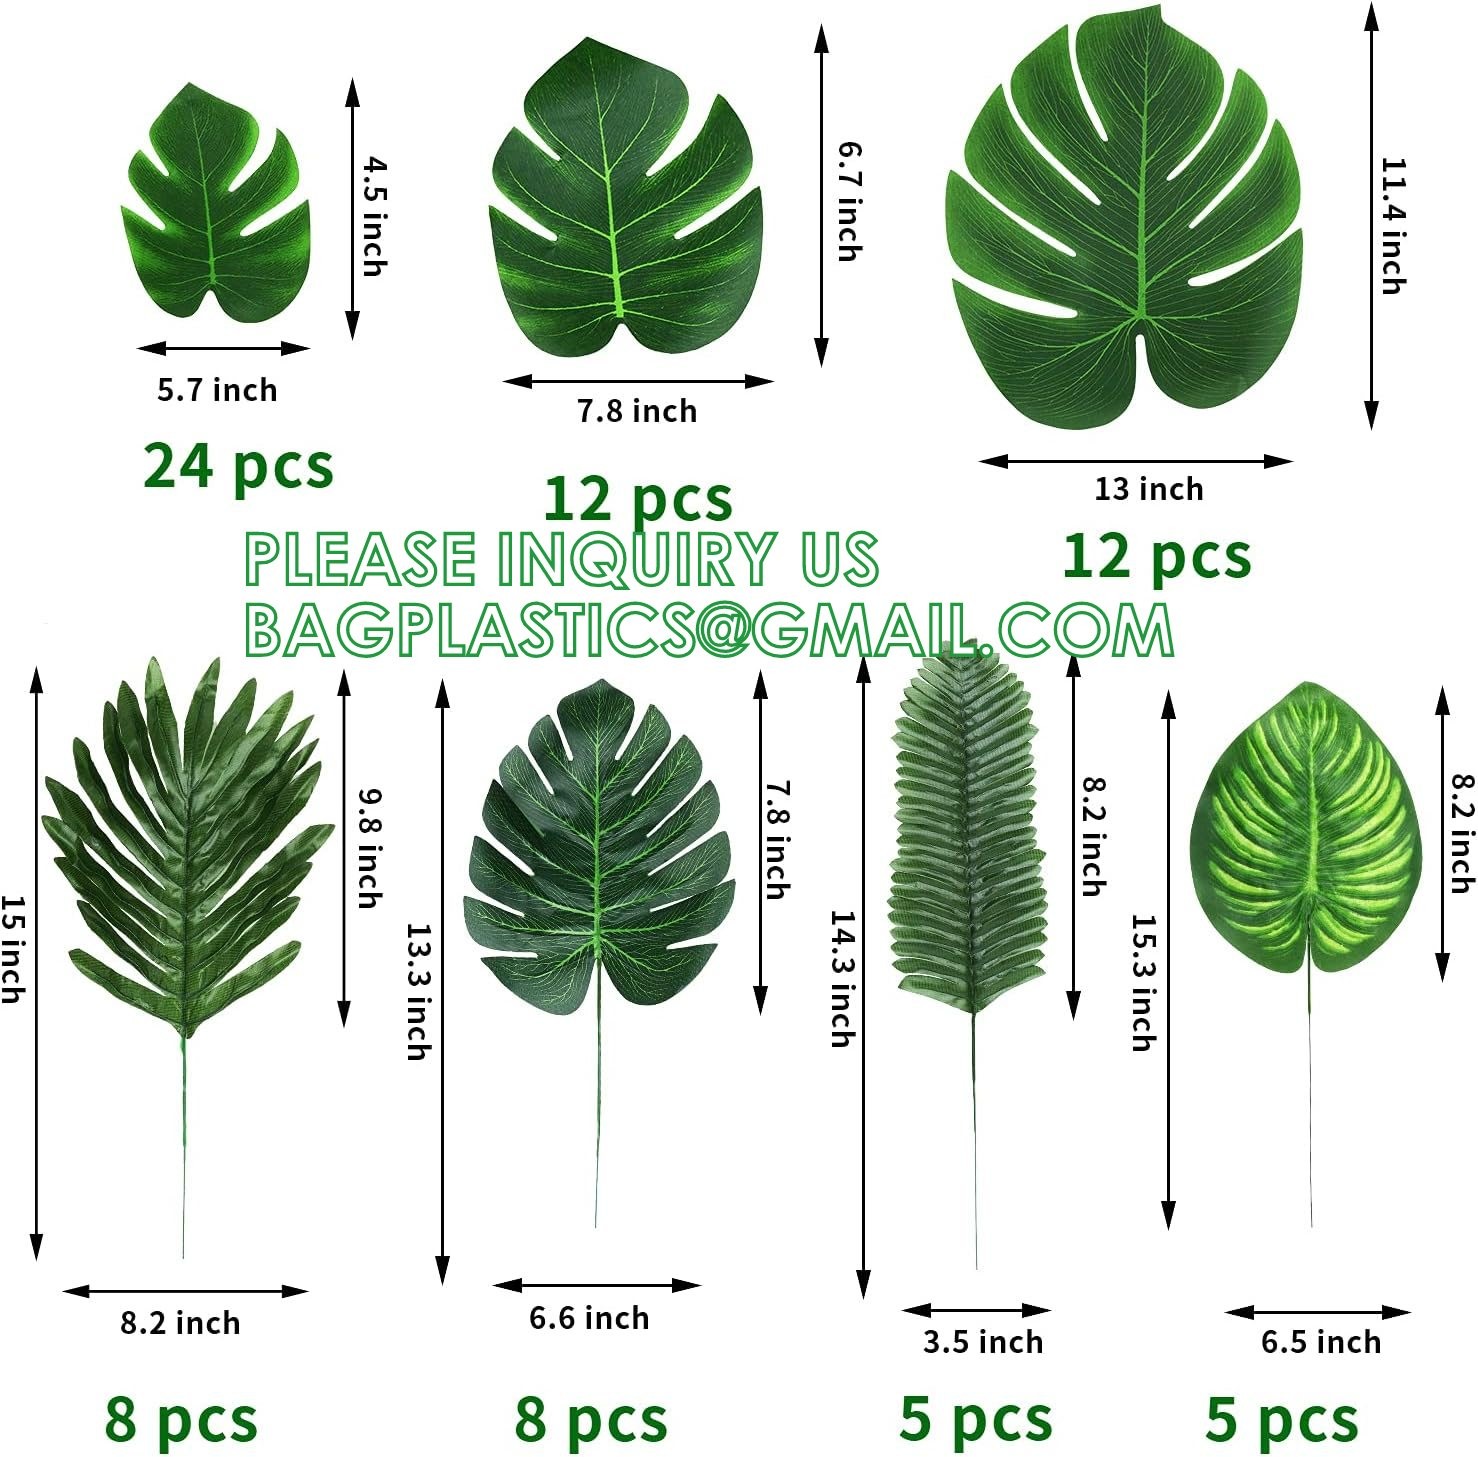 Buy Kinds Artificial Palm Leaves Tropical Fake Leaves, Monstera Leaf Faux Leaves Party Table Decoration Wedding Birthday at wholesale prices